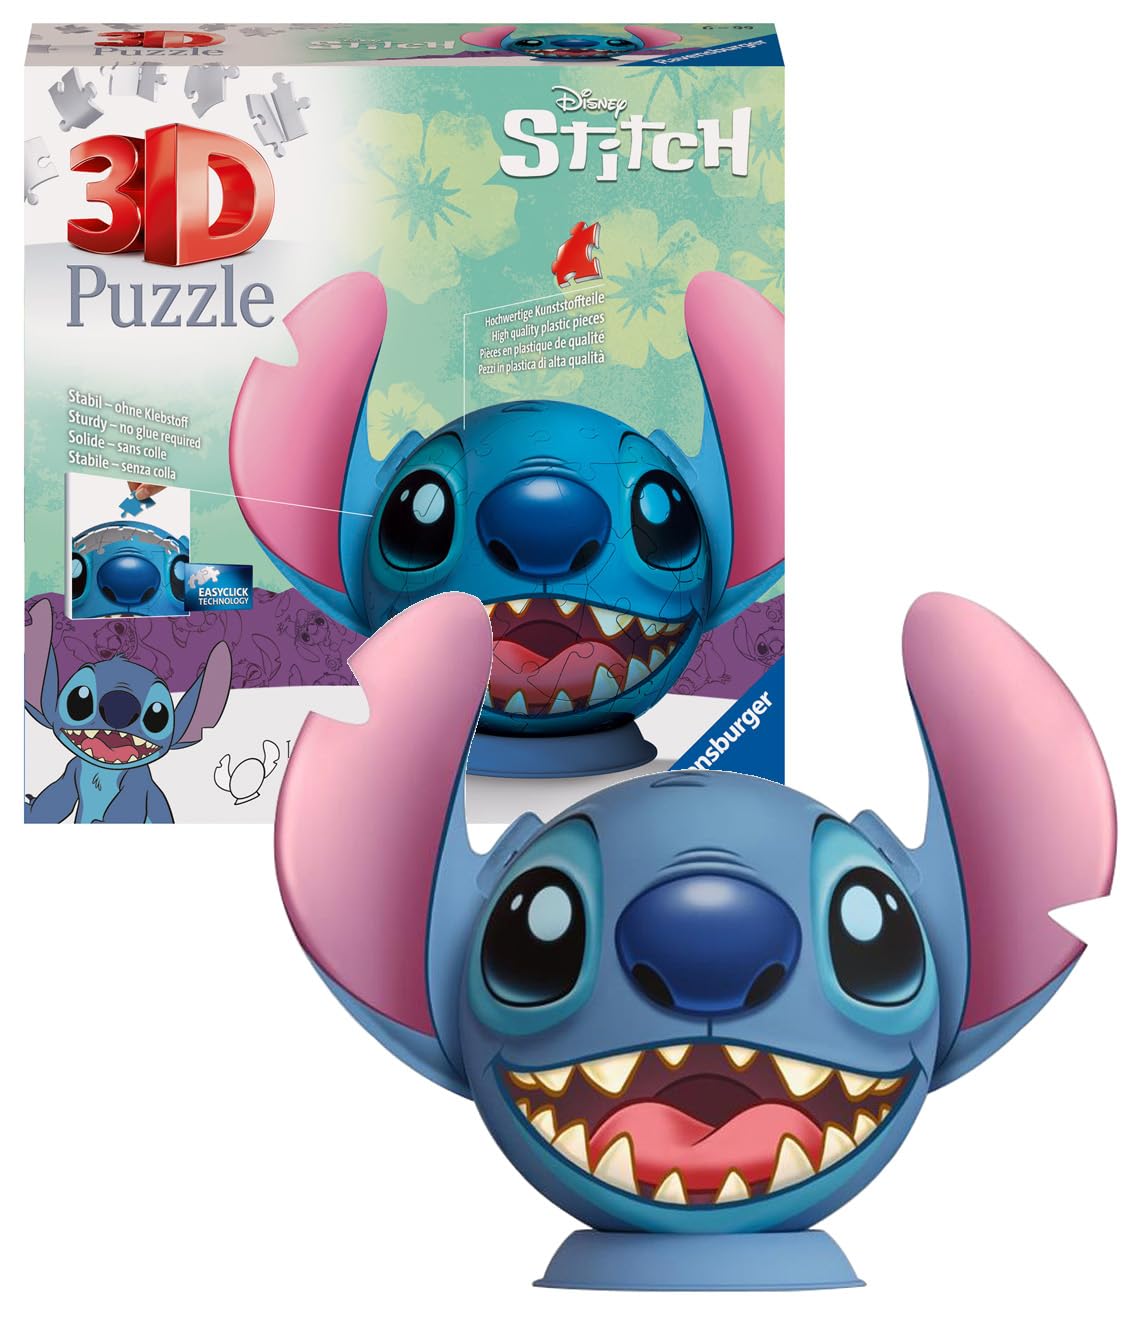 Ravensburger Disney Stitch 3D Jigsaw Puzzle for Children Age 6 Years Up - 72 Pieces - No Glue Required - Easter Gifts for Kids